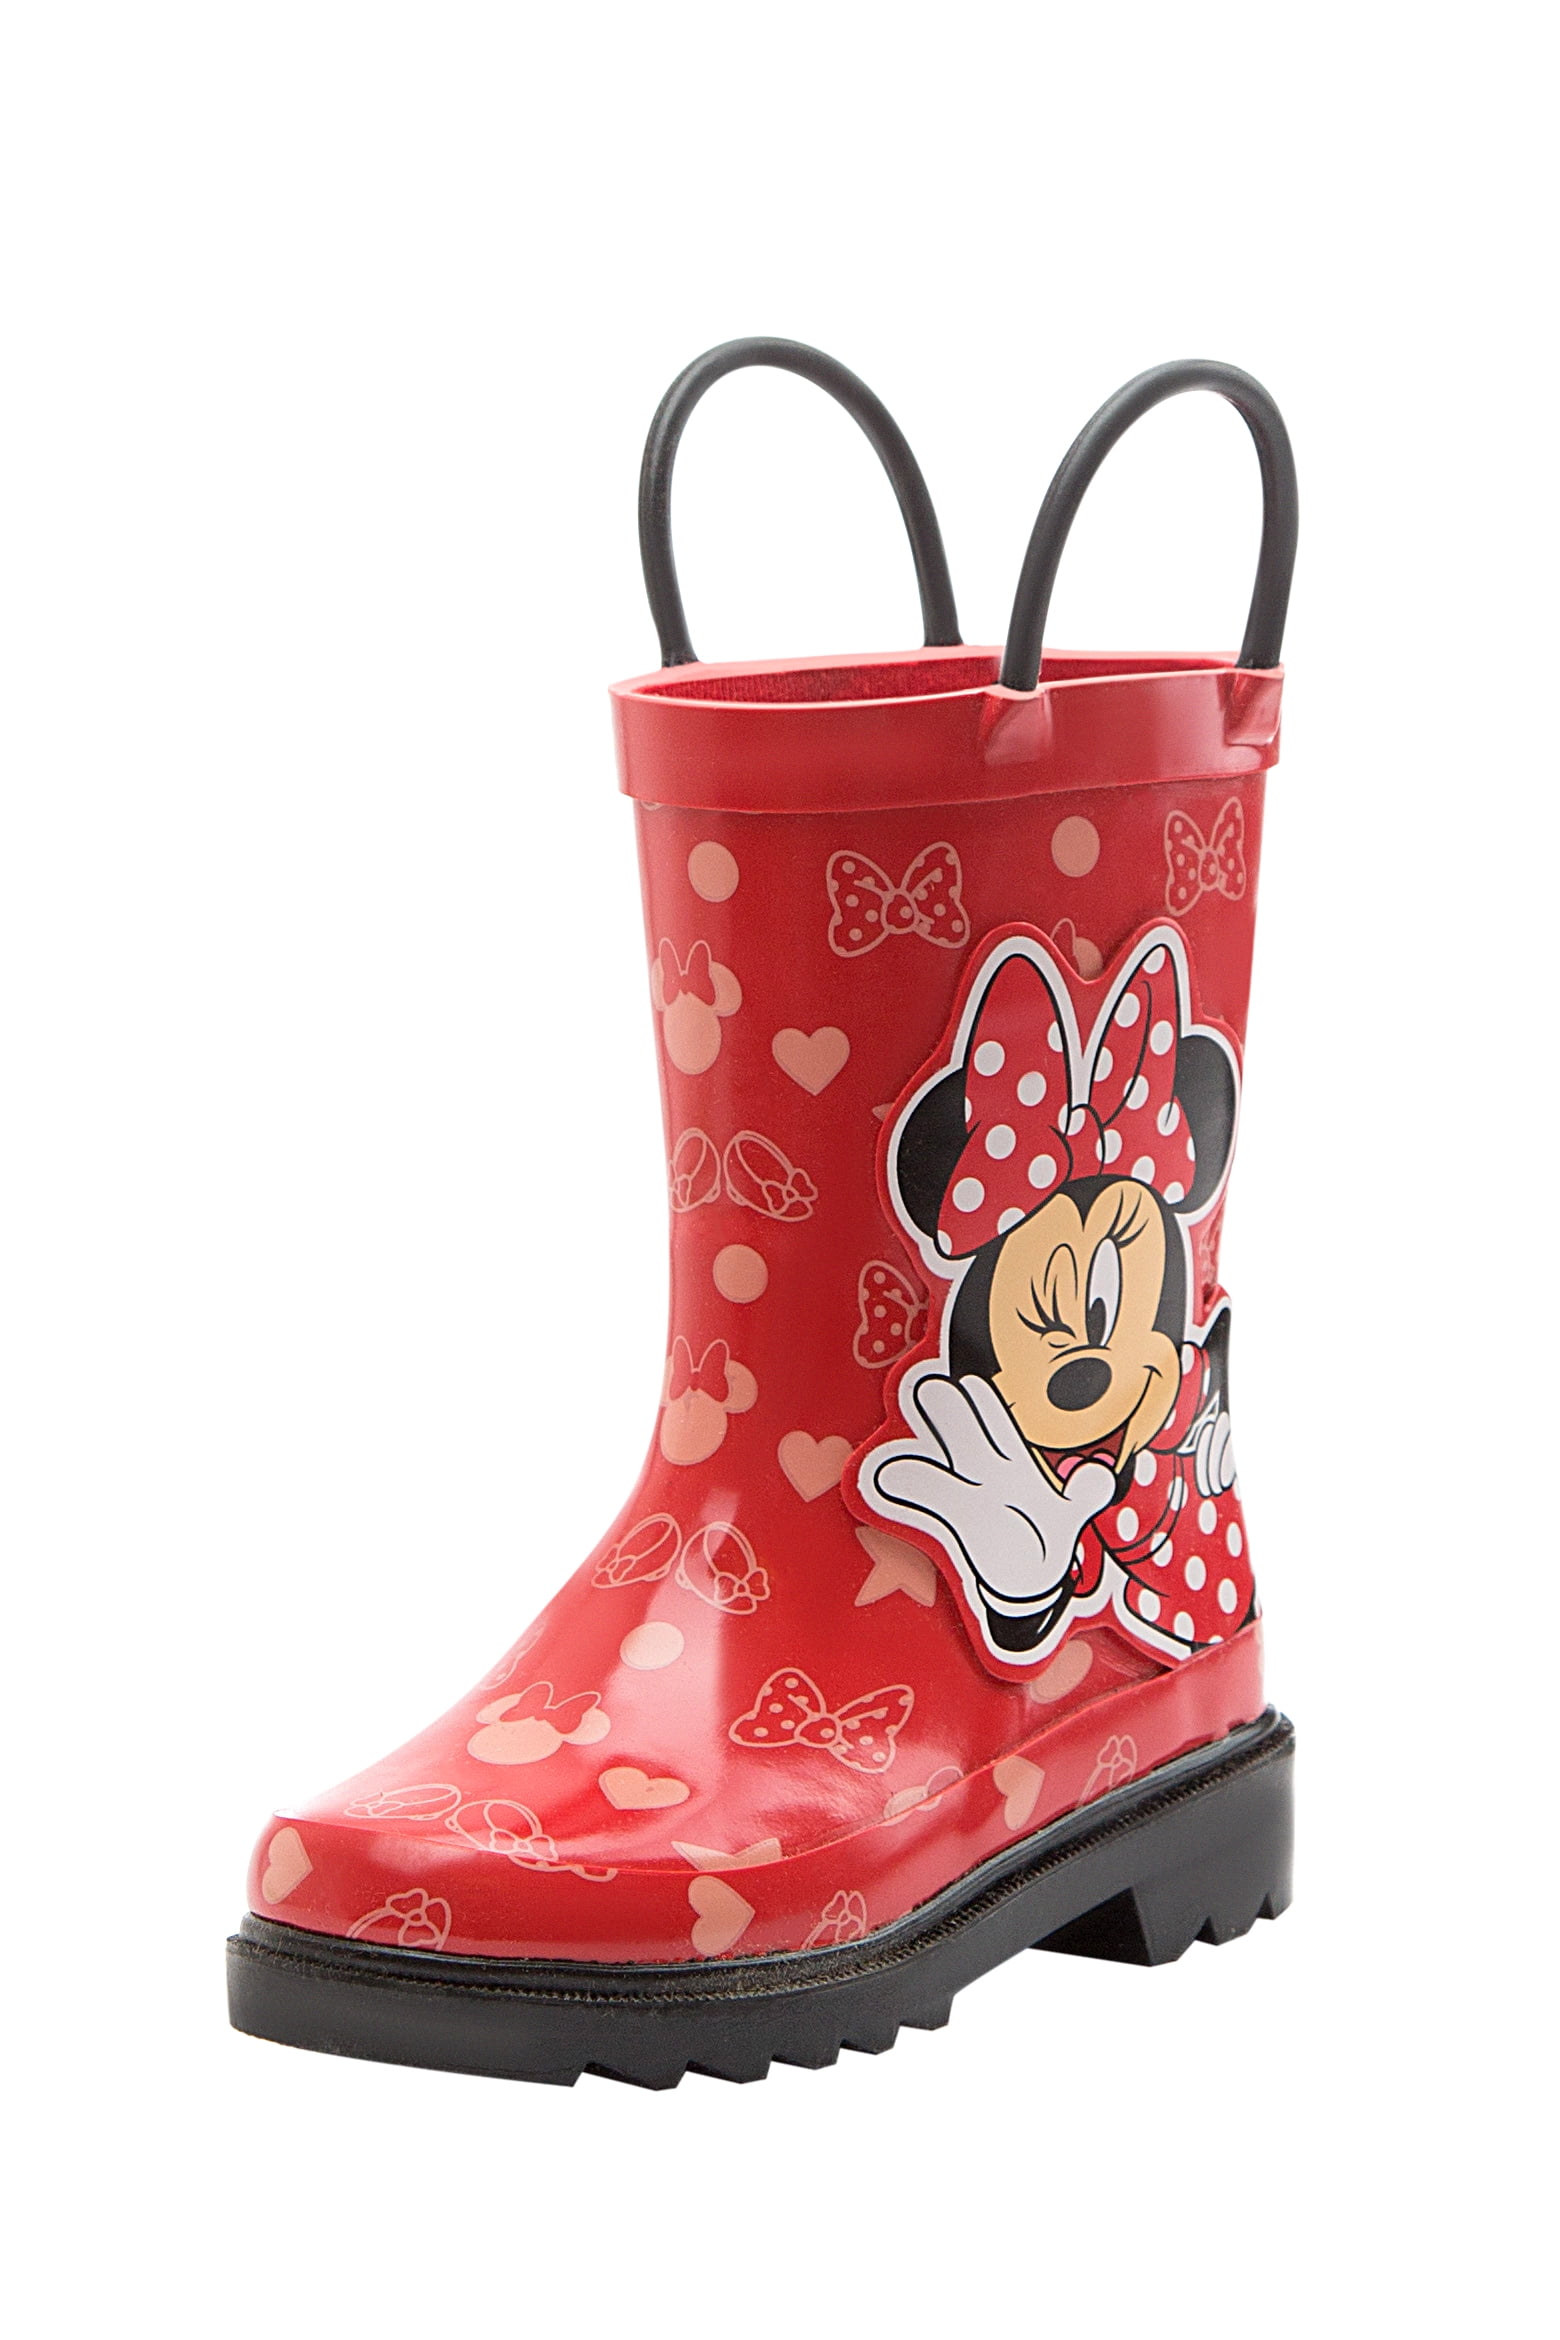 Minnie Mouse Calf Boots Childs Girls Black Shoes Boot Kids Footwear 